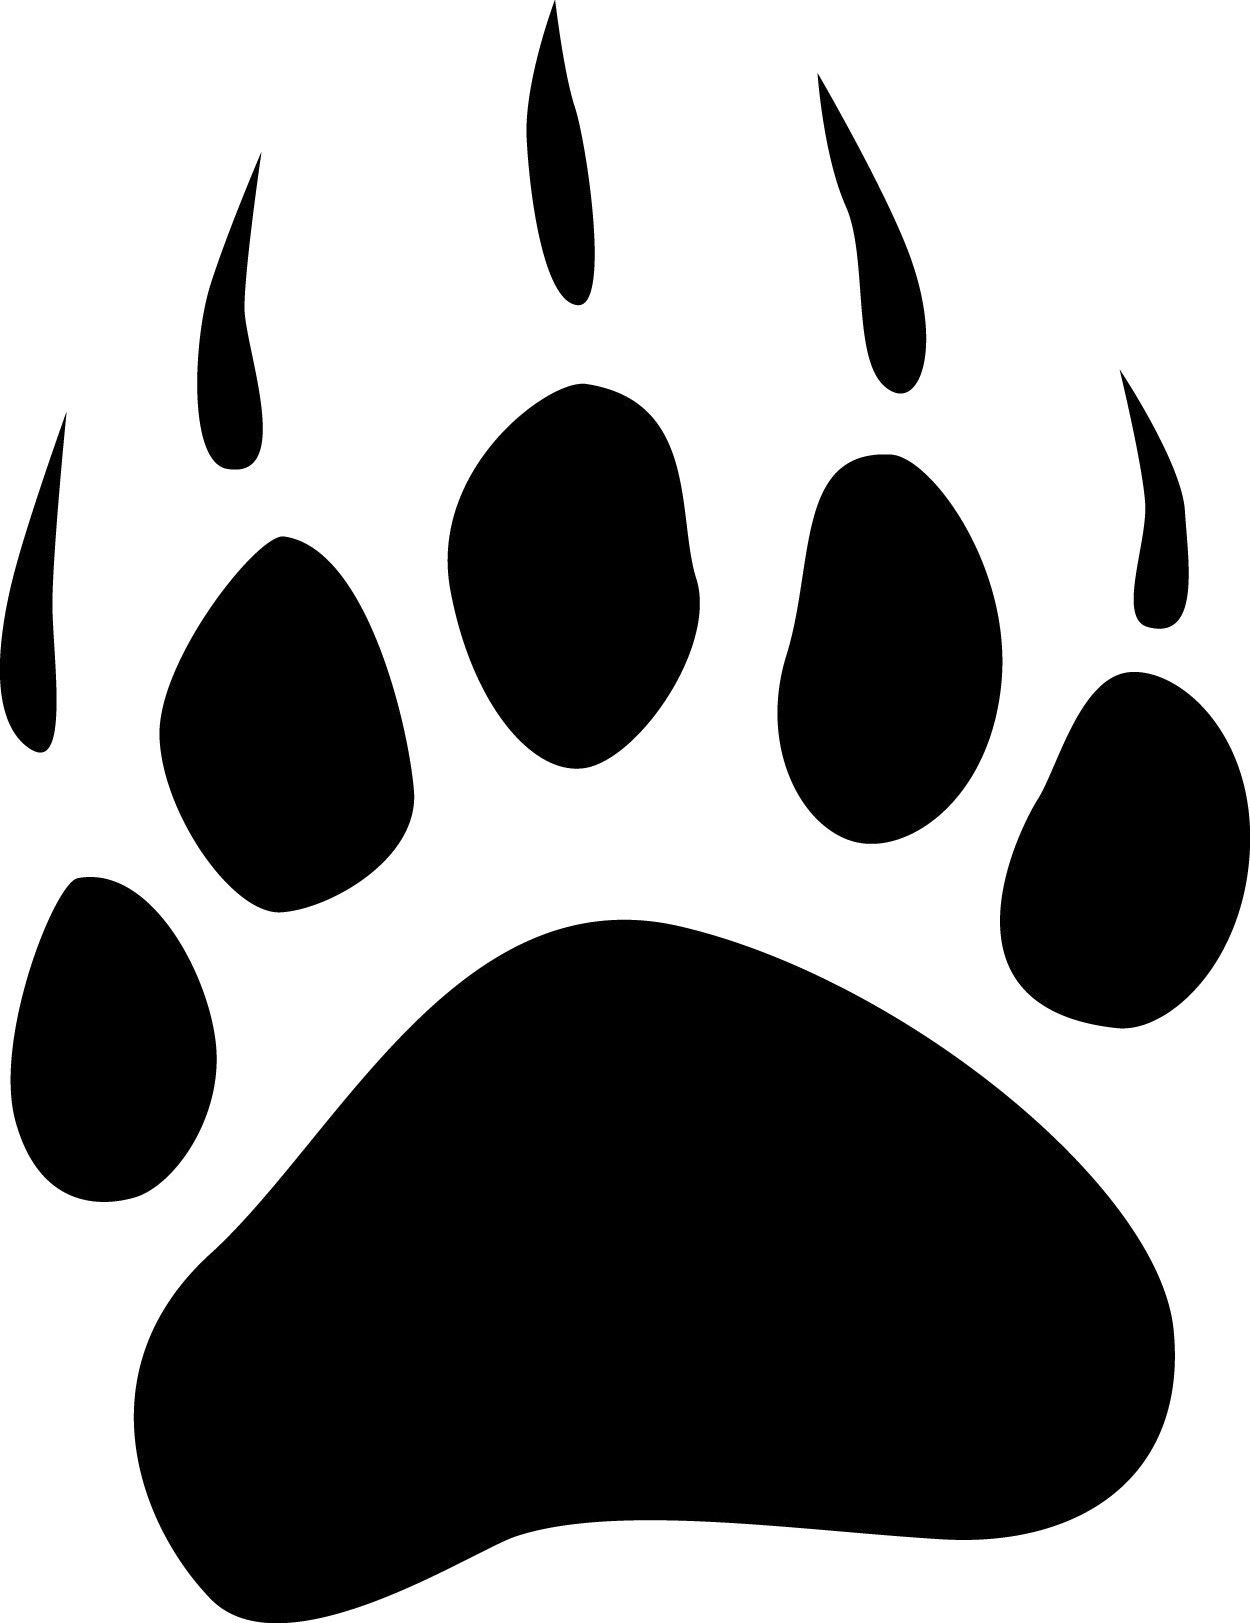 Bear Paw Silhouette - Clipart library